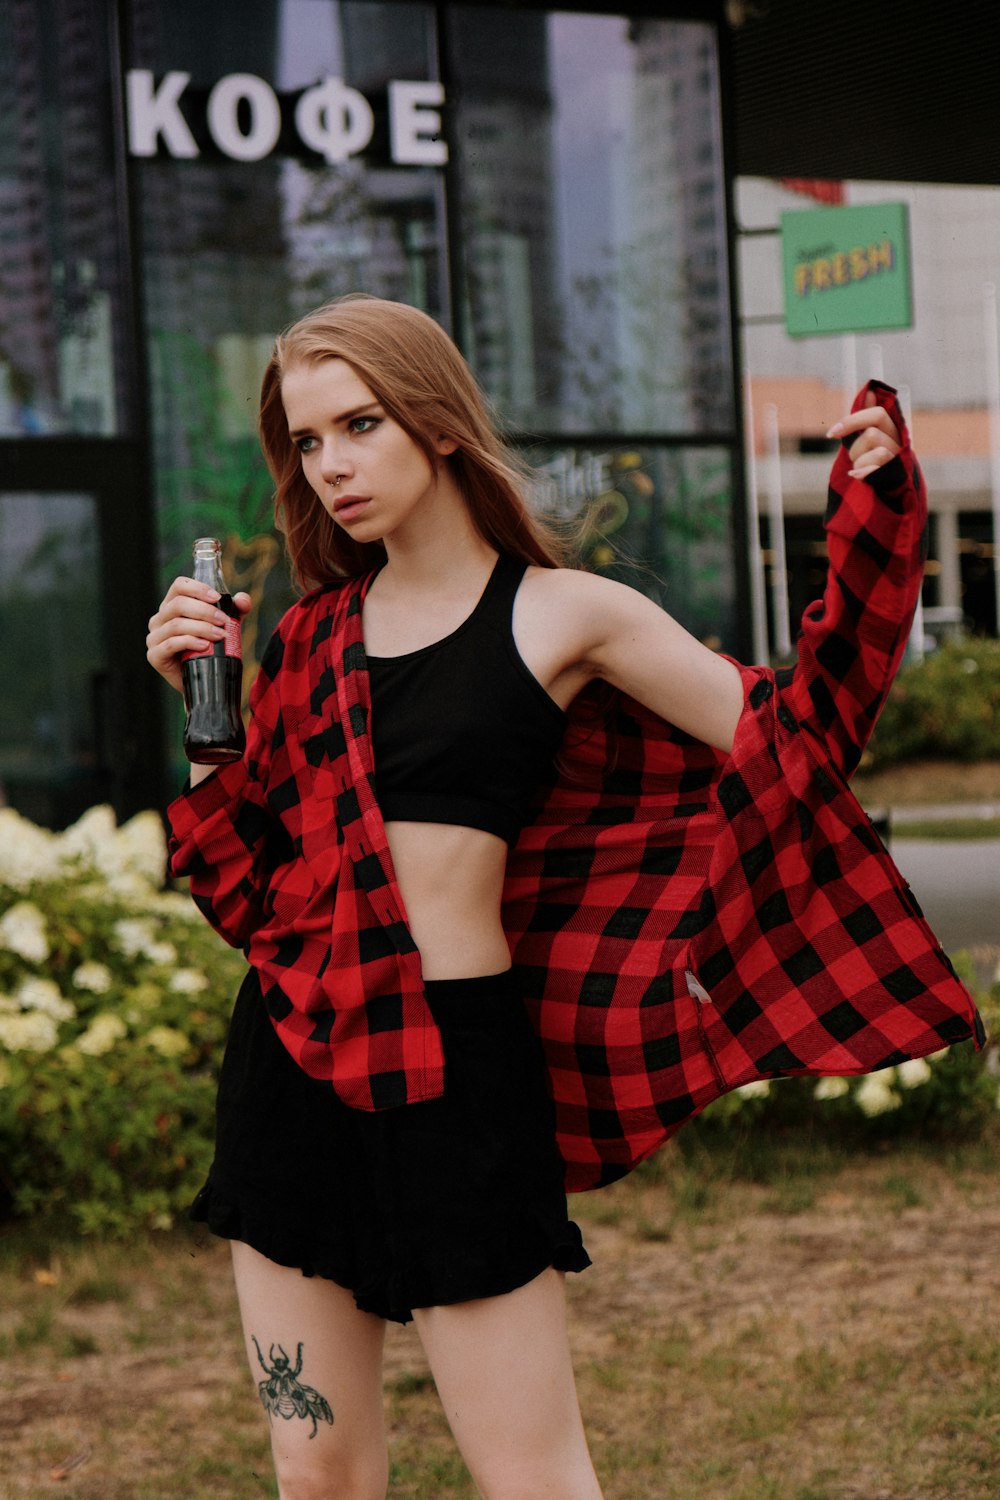 a woman in a red and black jacket holding a soda